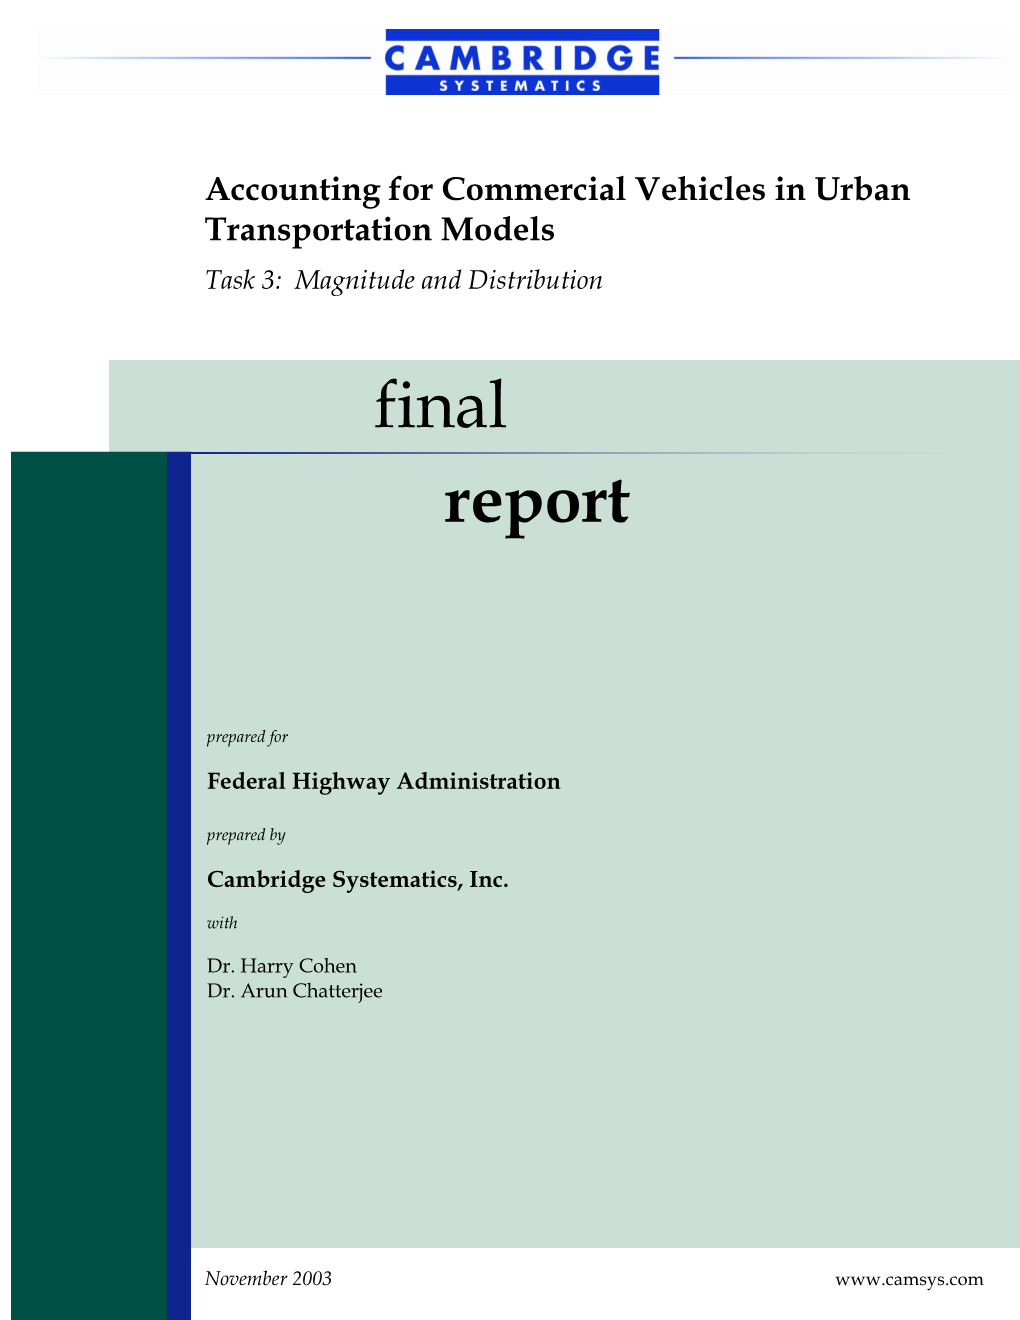 Final Report Accounting for Commercial Vehicles in Urban Transportation Models